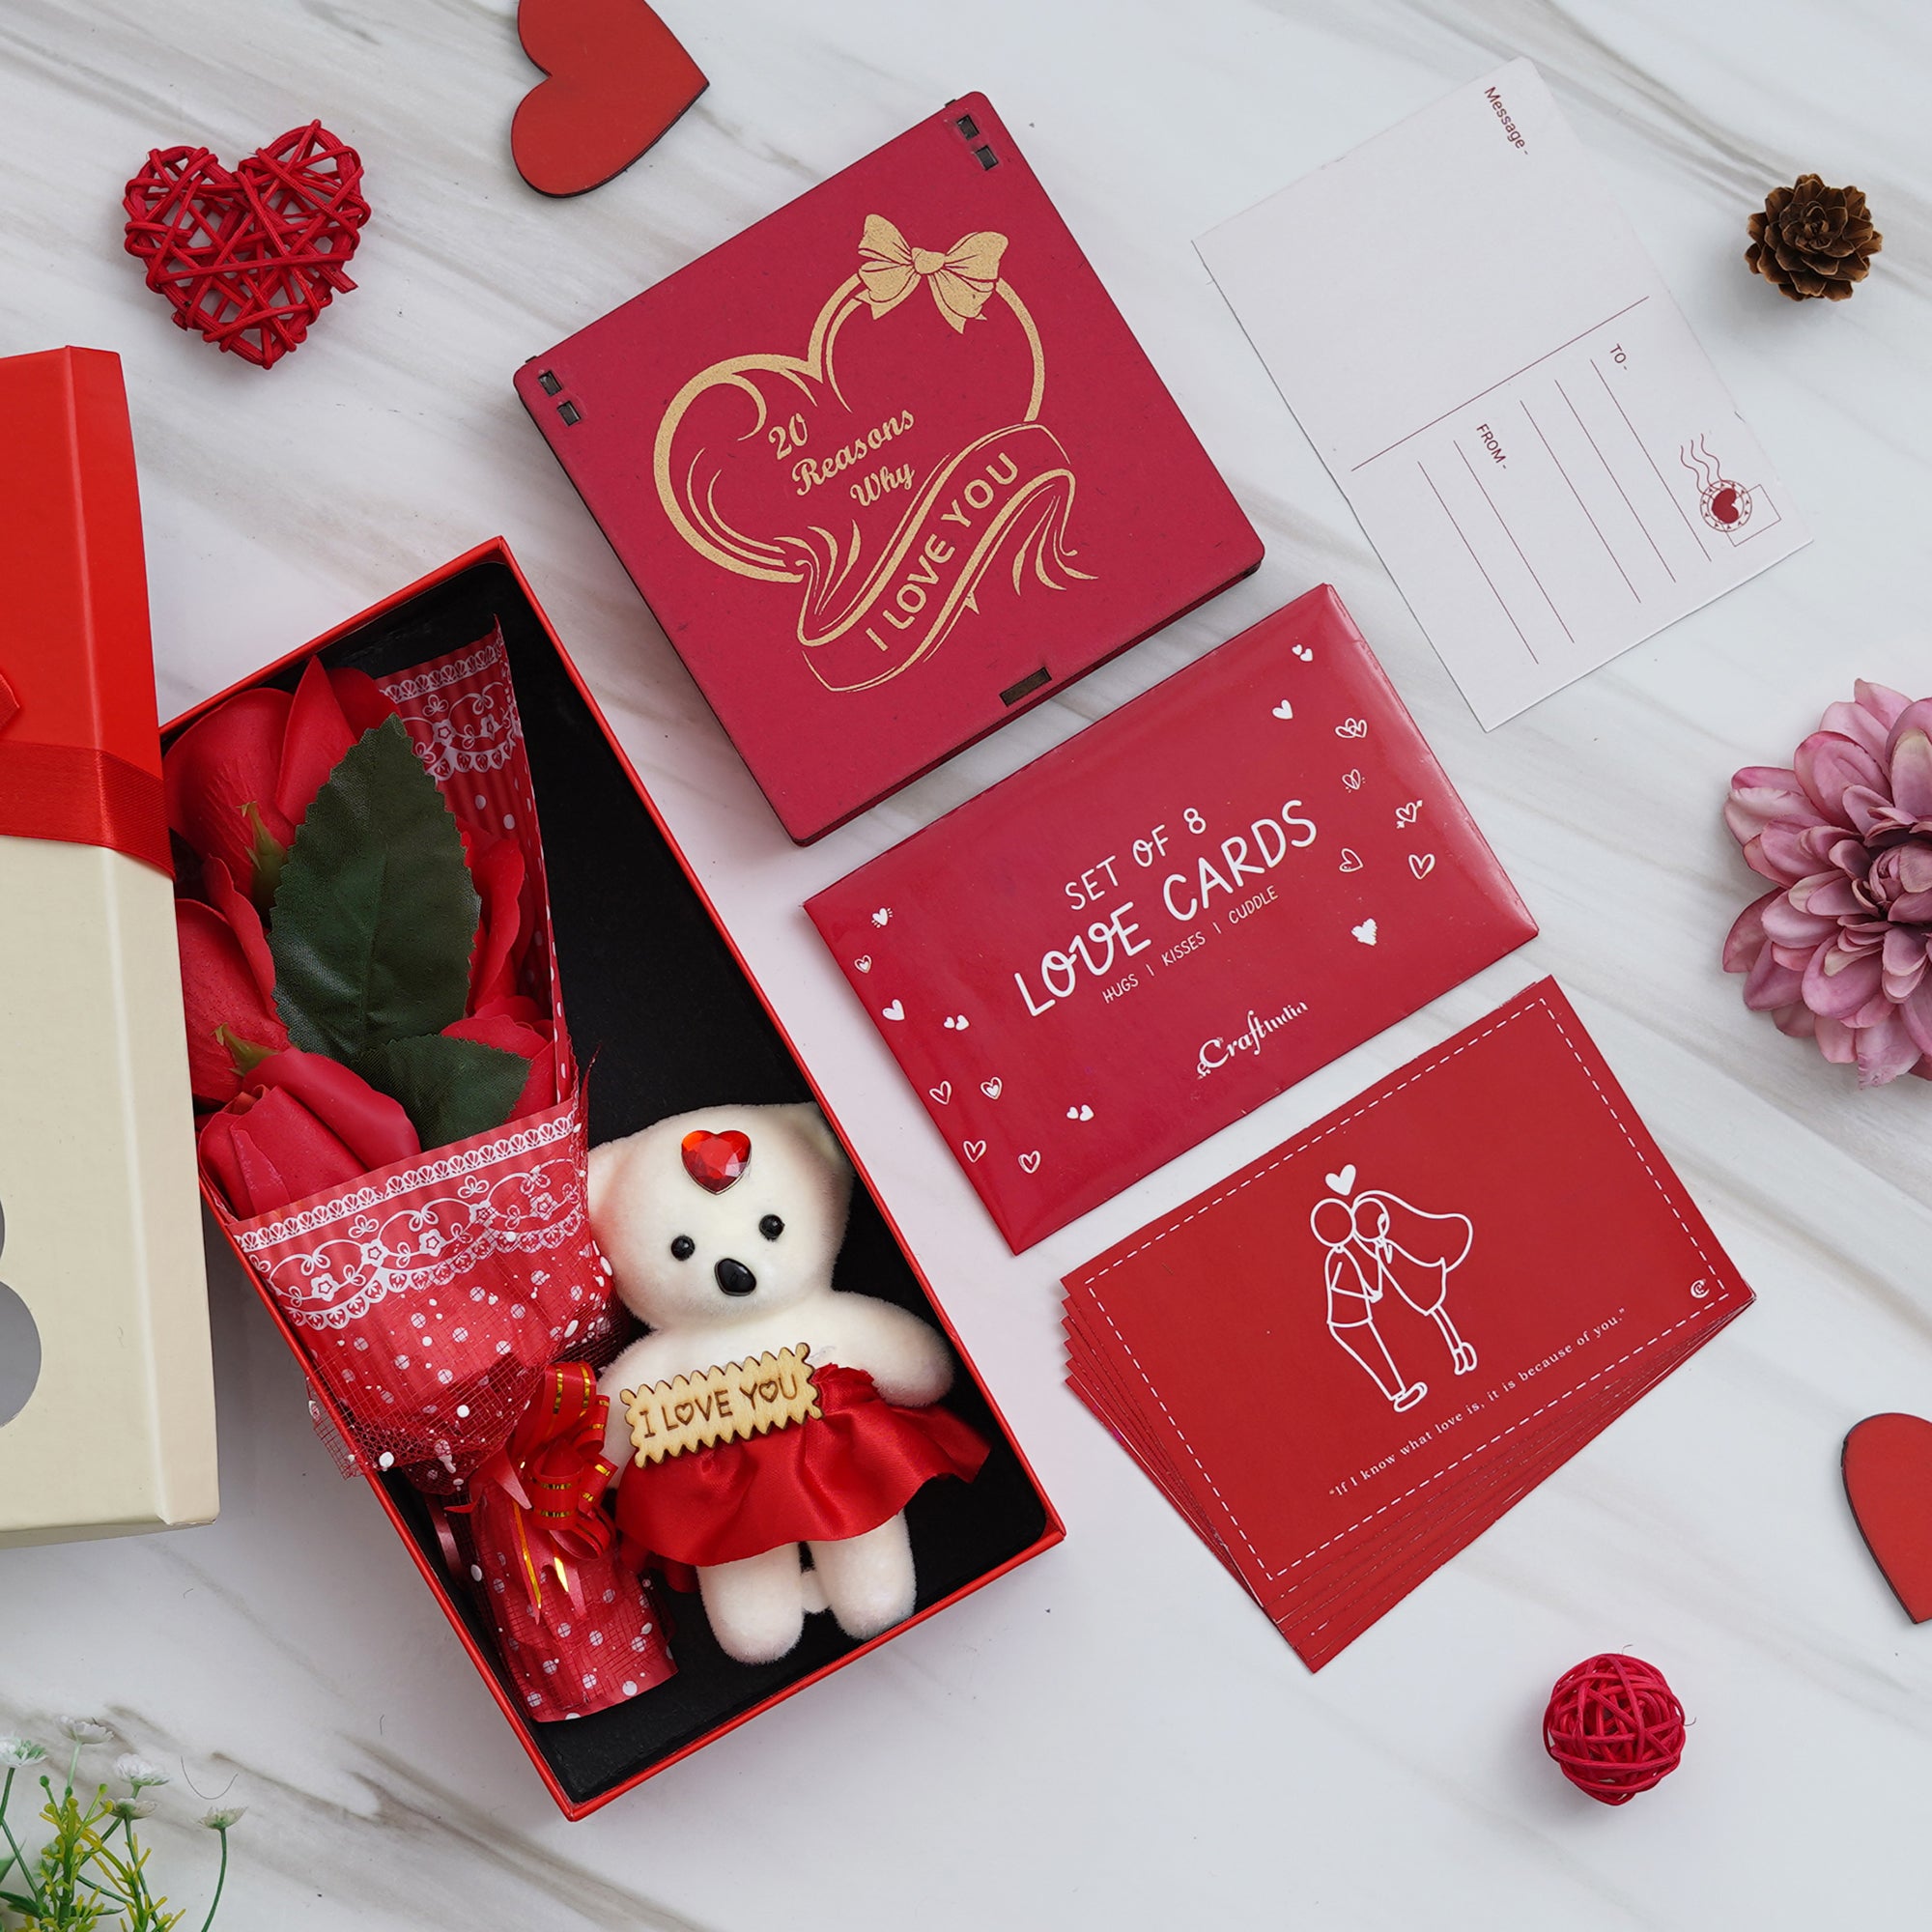 Valentine Combo of Pack of 8 Love Gift Cards, "20 Reasons Why I Love You" Printed on Little Red Hearts Decorative Wooden Gift Set Box, Red Roses Bouquet and White, Red Teddy Bear Valentine's Rectangle Shaped Gift Box